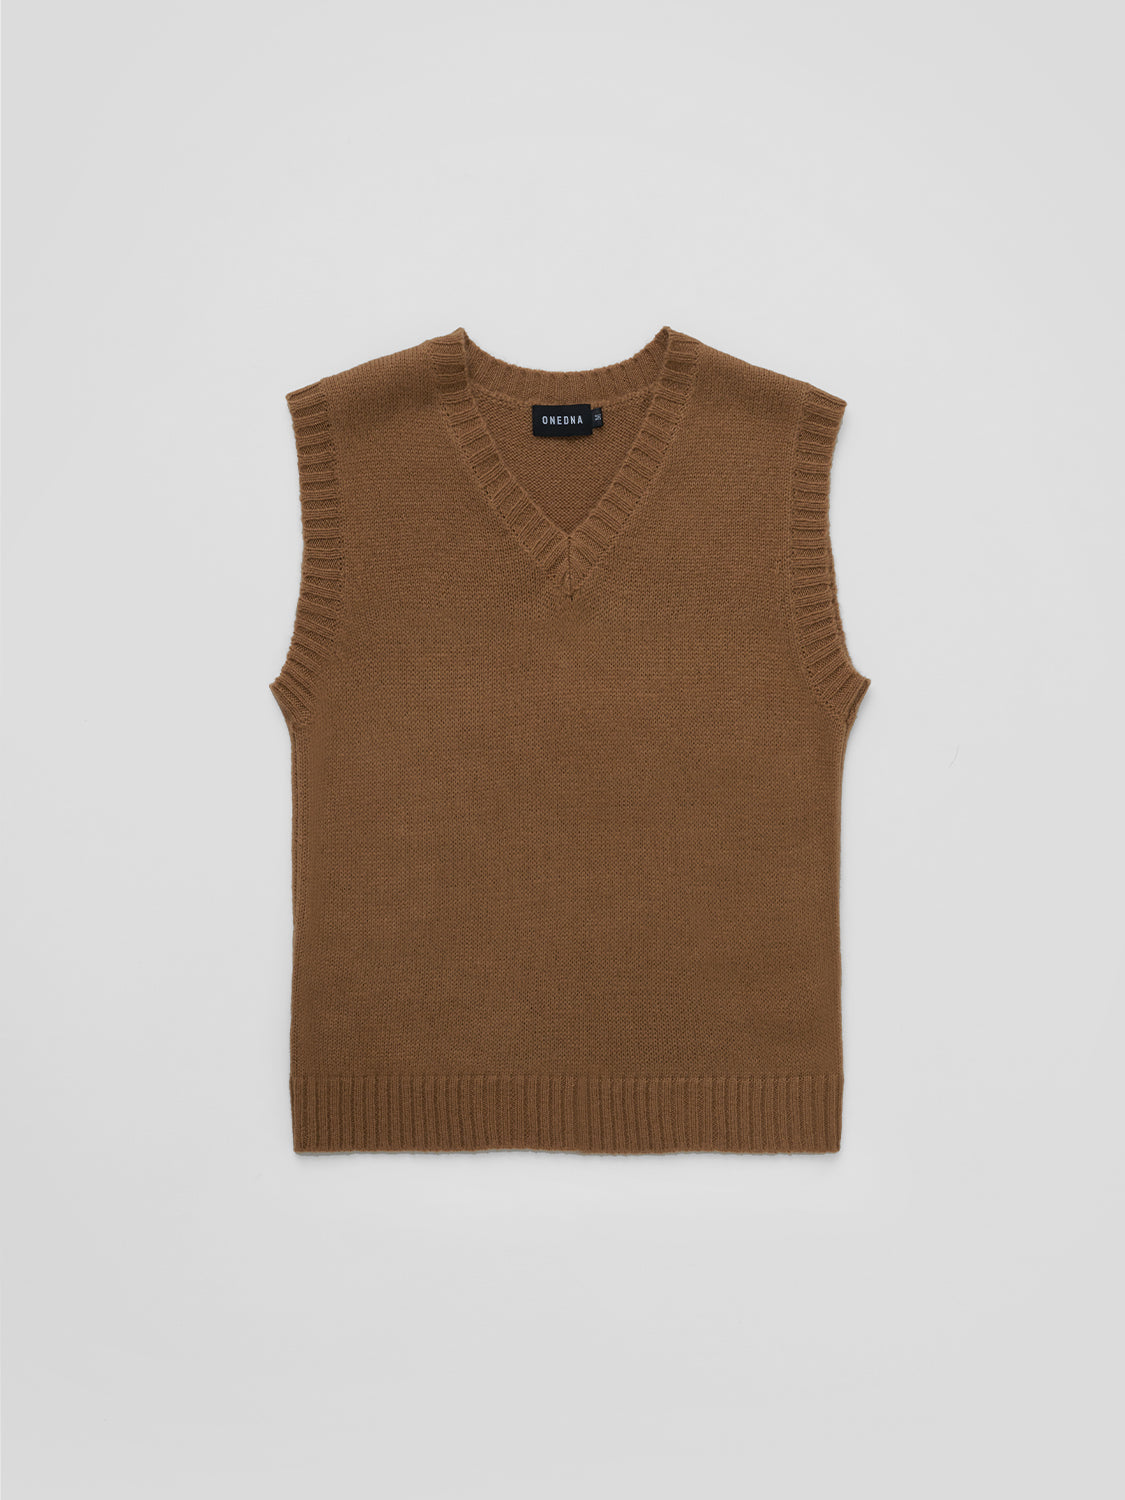 solid color mohair sweater vest